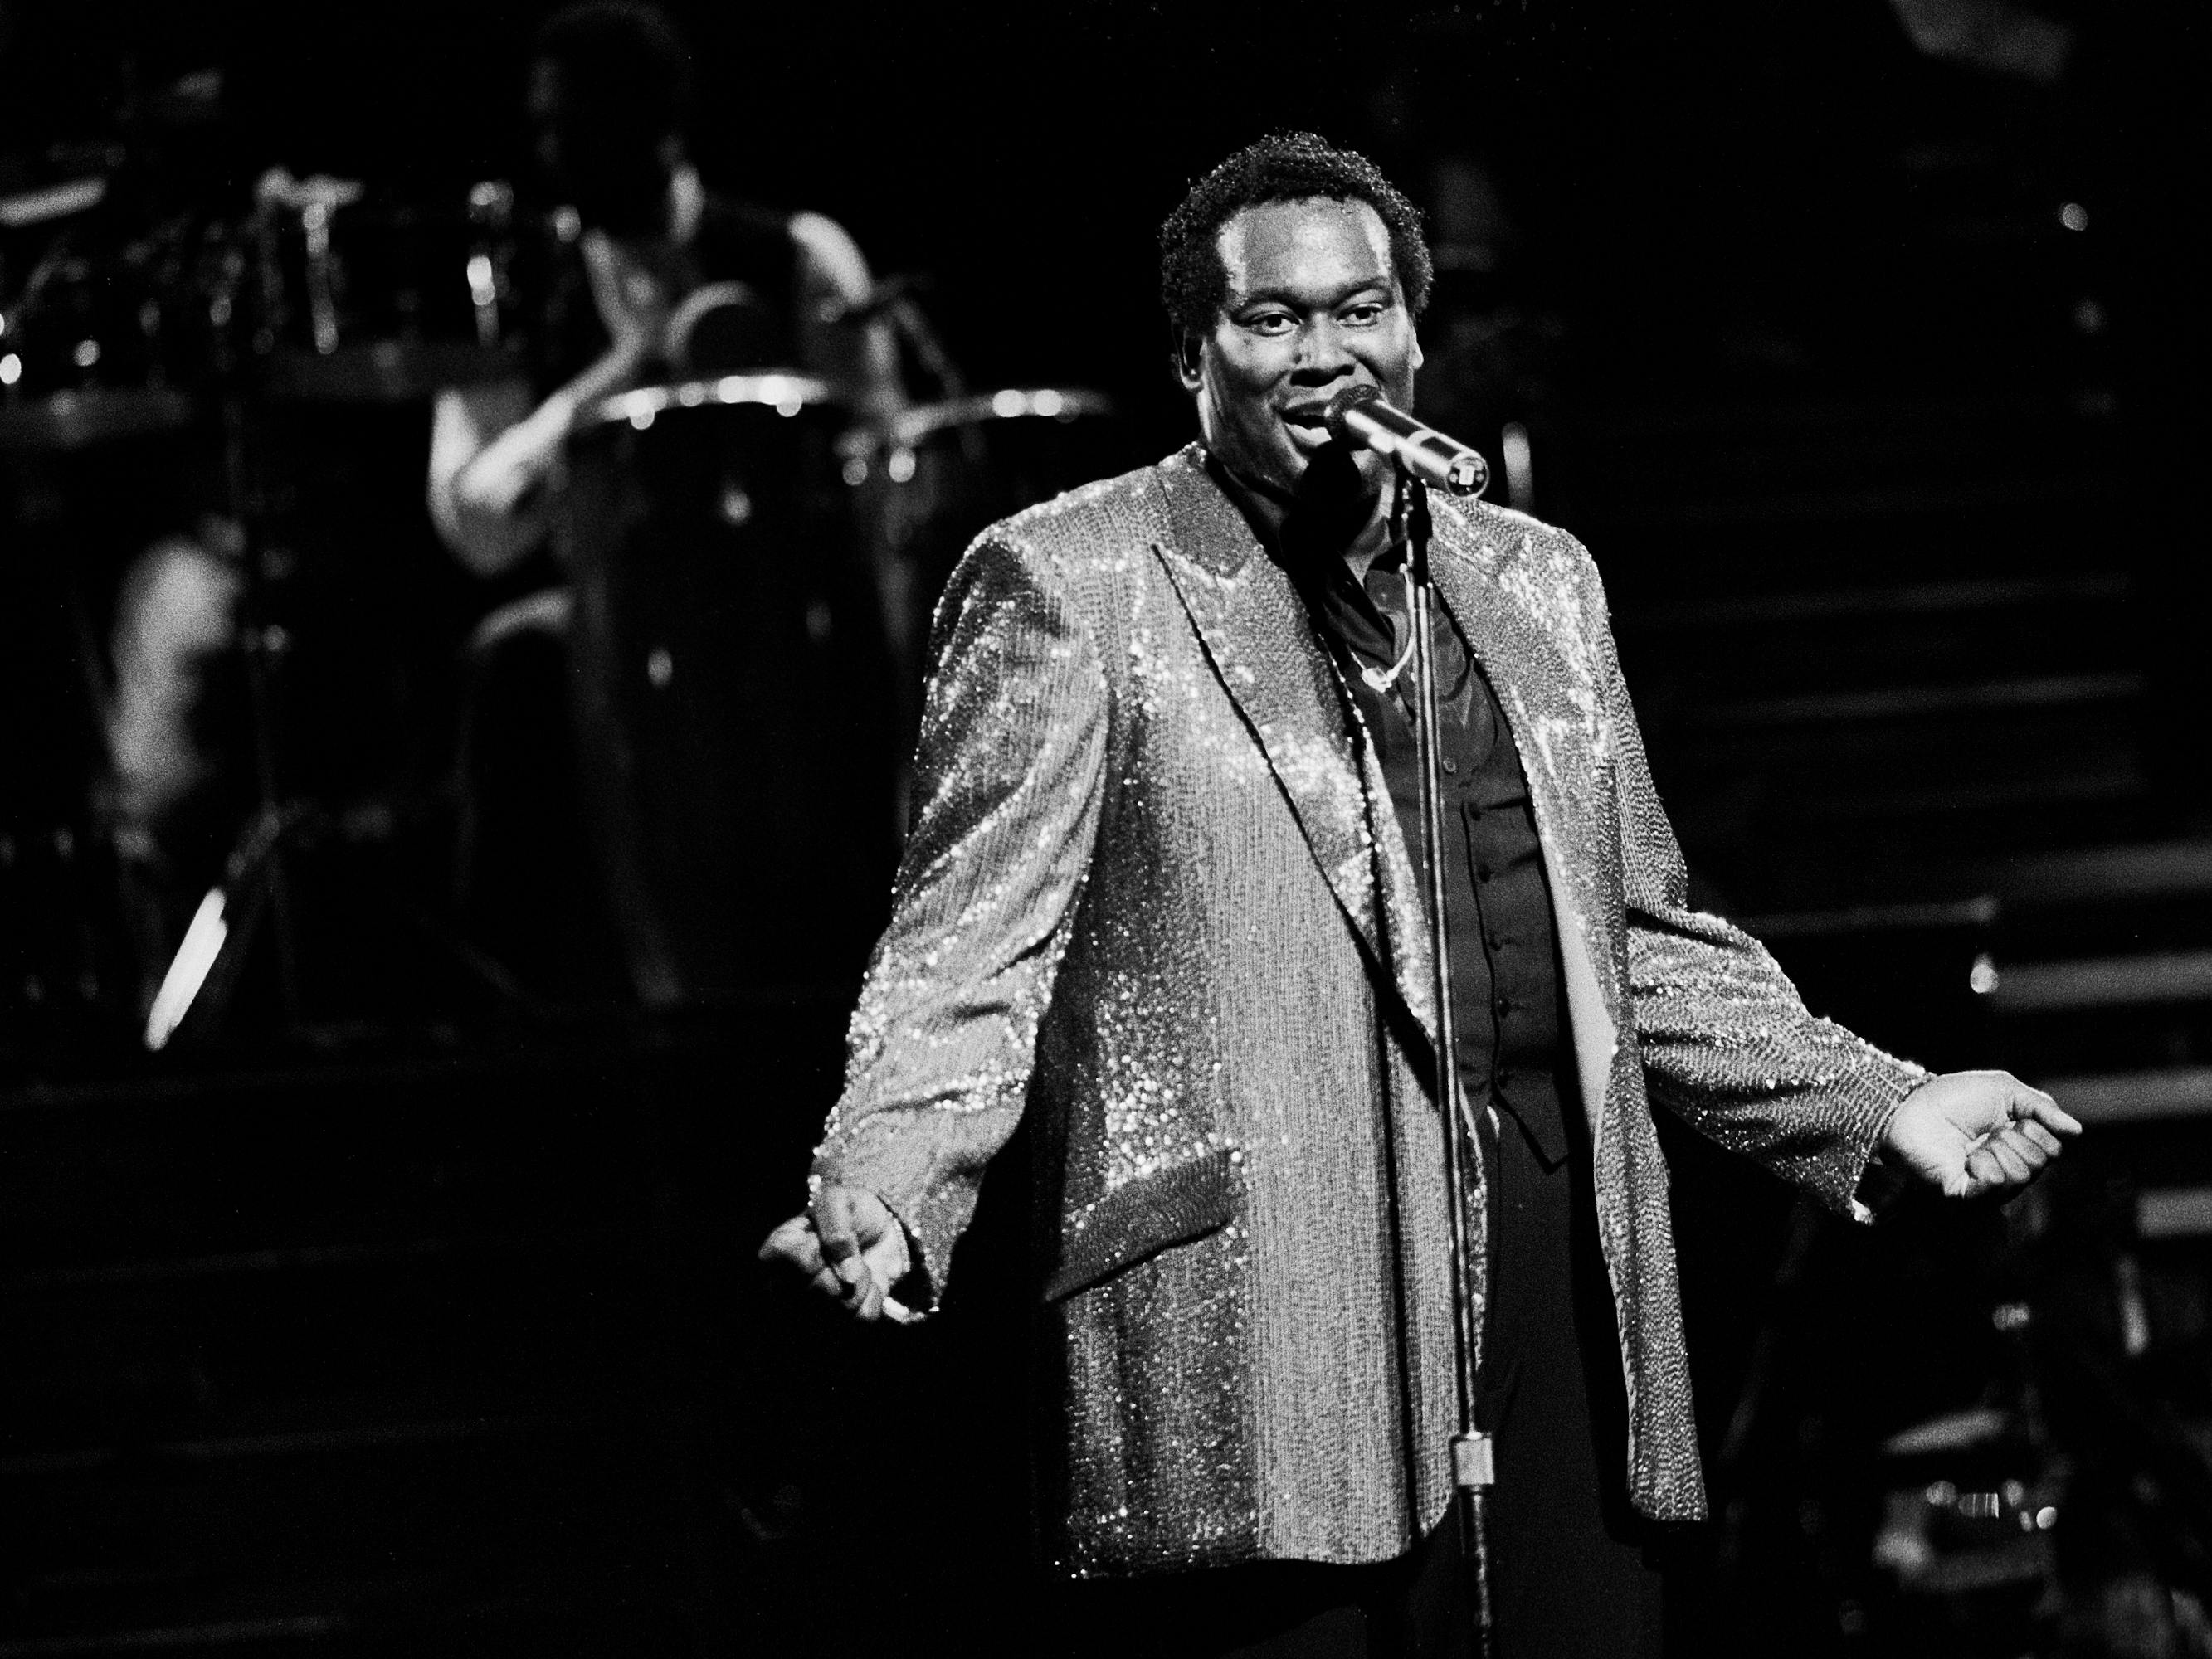 Luther Vandross at the Aire Crown Theater in Chicago Illinois in January 12, 1984. Vandross sings into a microphone and wears a sparkly blazer.